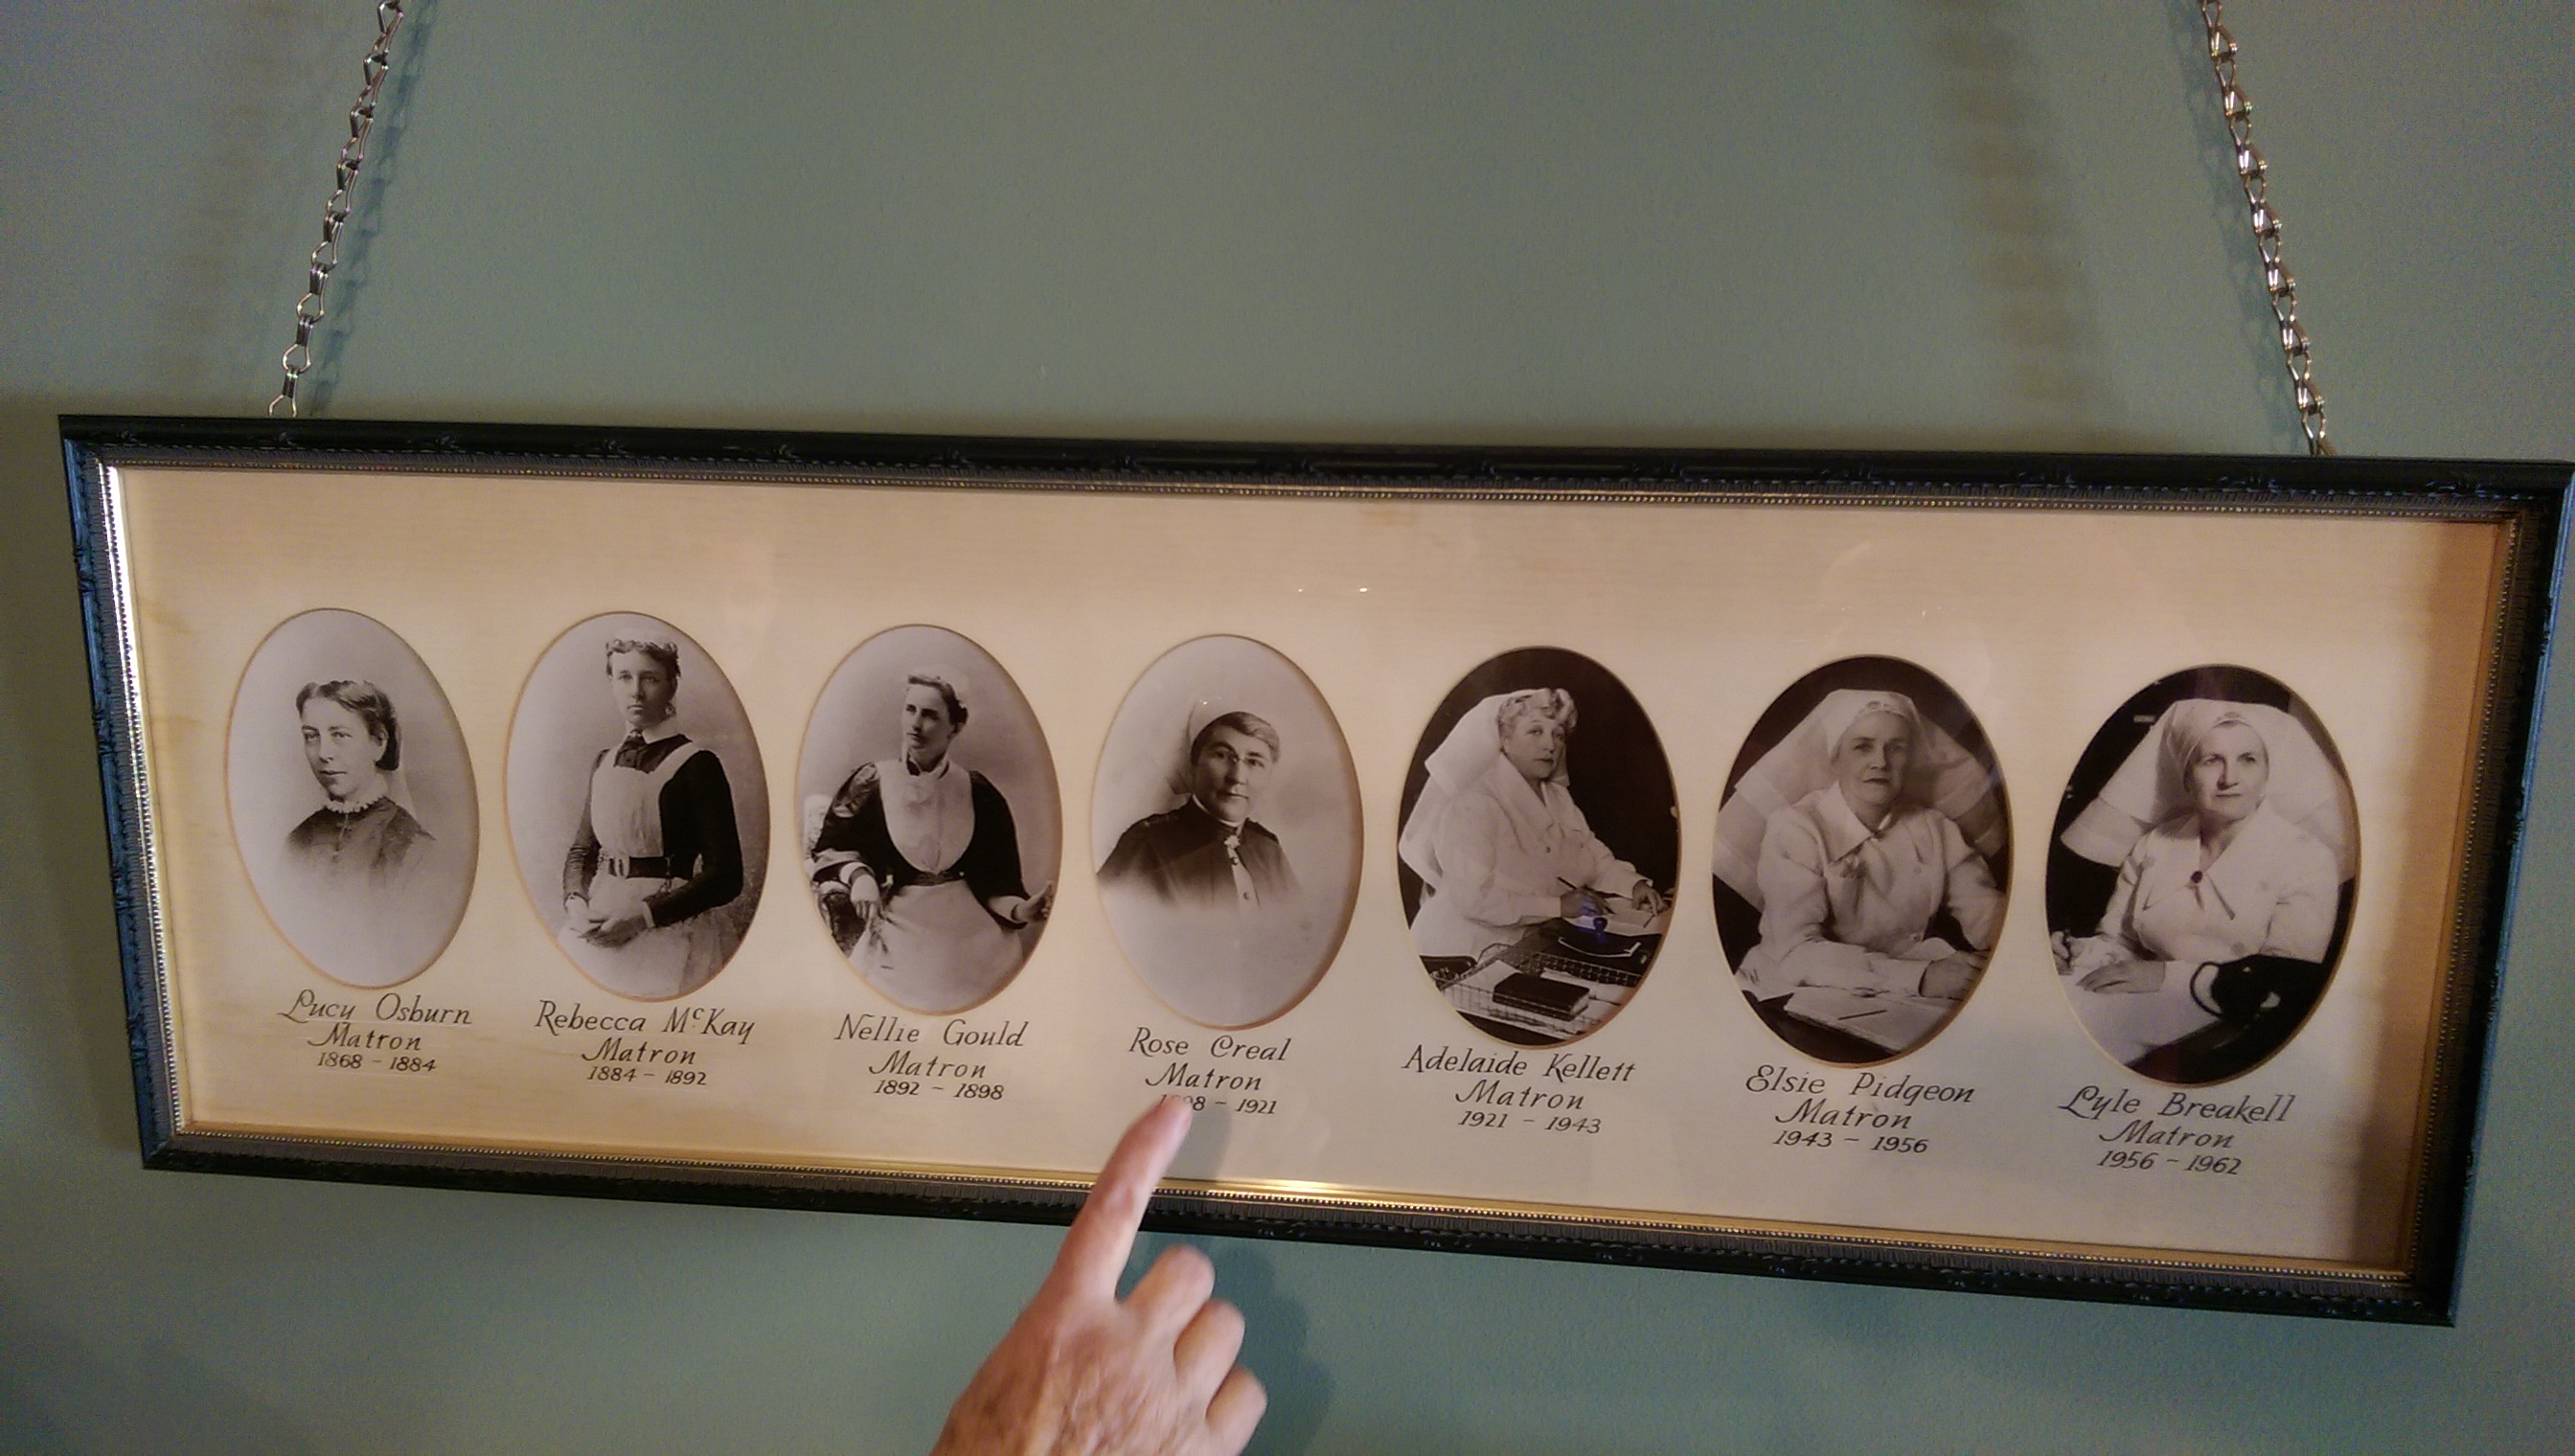 SYDNEY HOSPITAL MATRON WALL PHOTOS. MATRON ROSE CREAL POINTED TO IS THE MATRON WHO DIED IN 1921 WITH